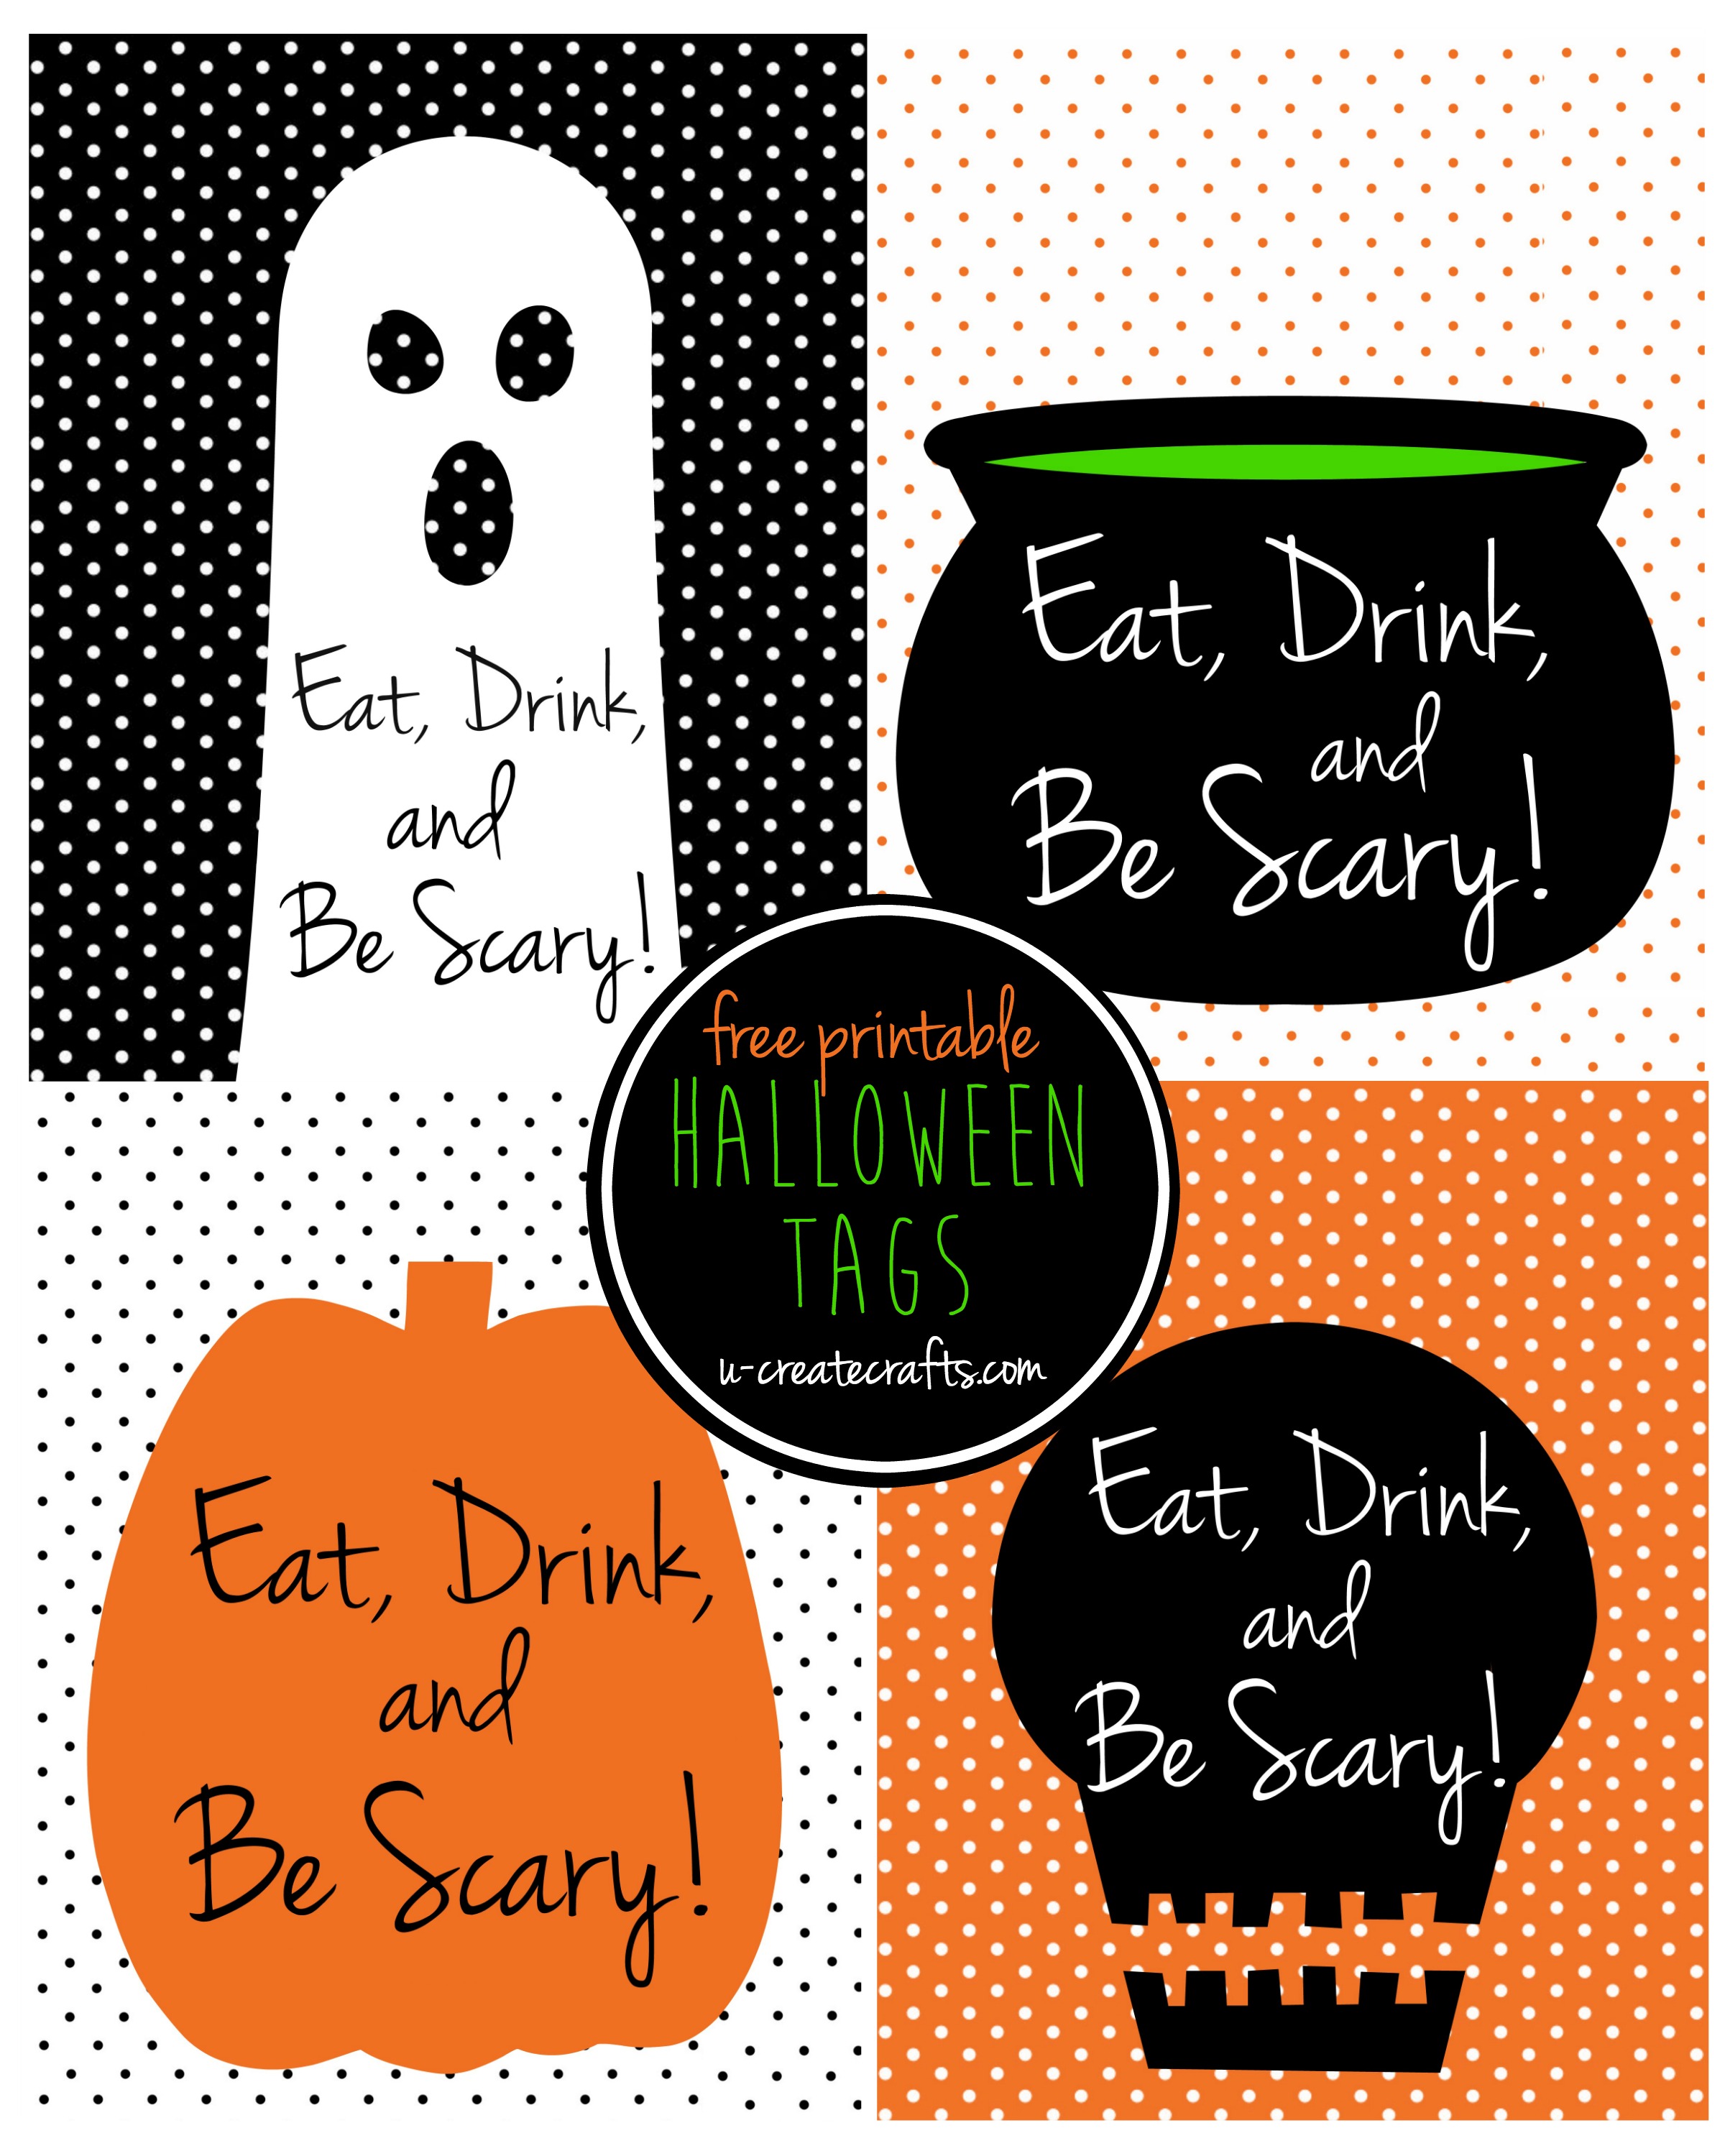 Eat, Drink, and Be Scary Halloween Printable Tags